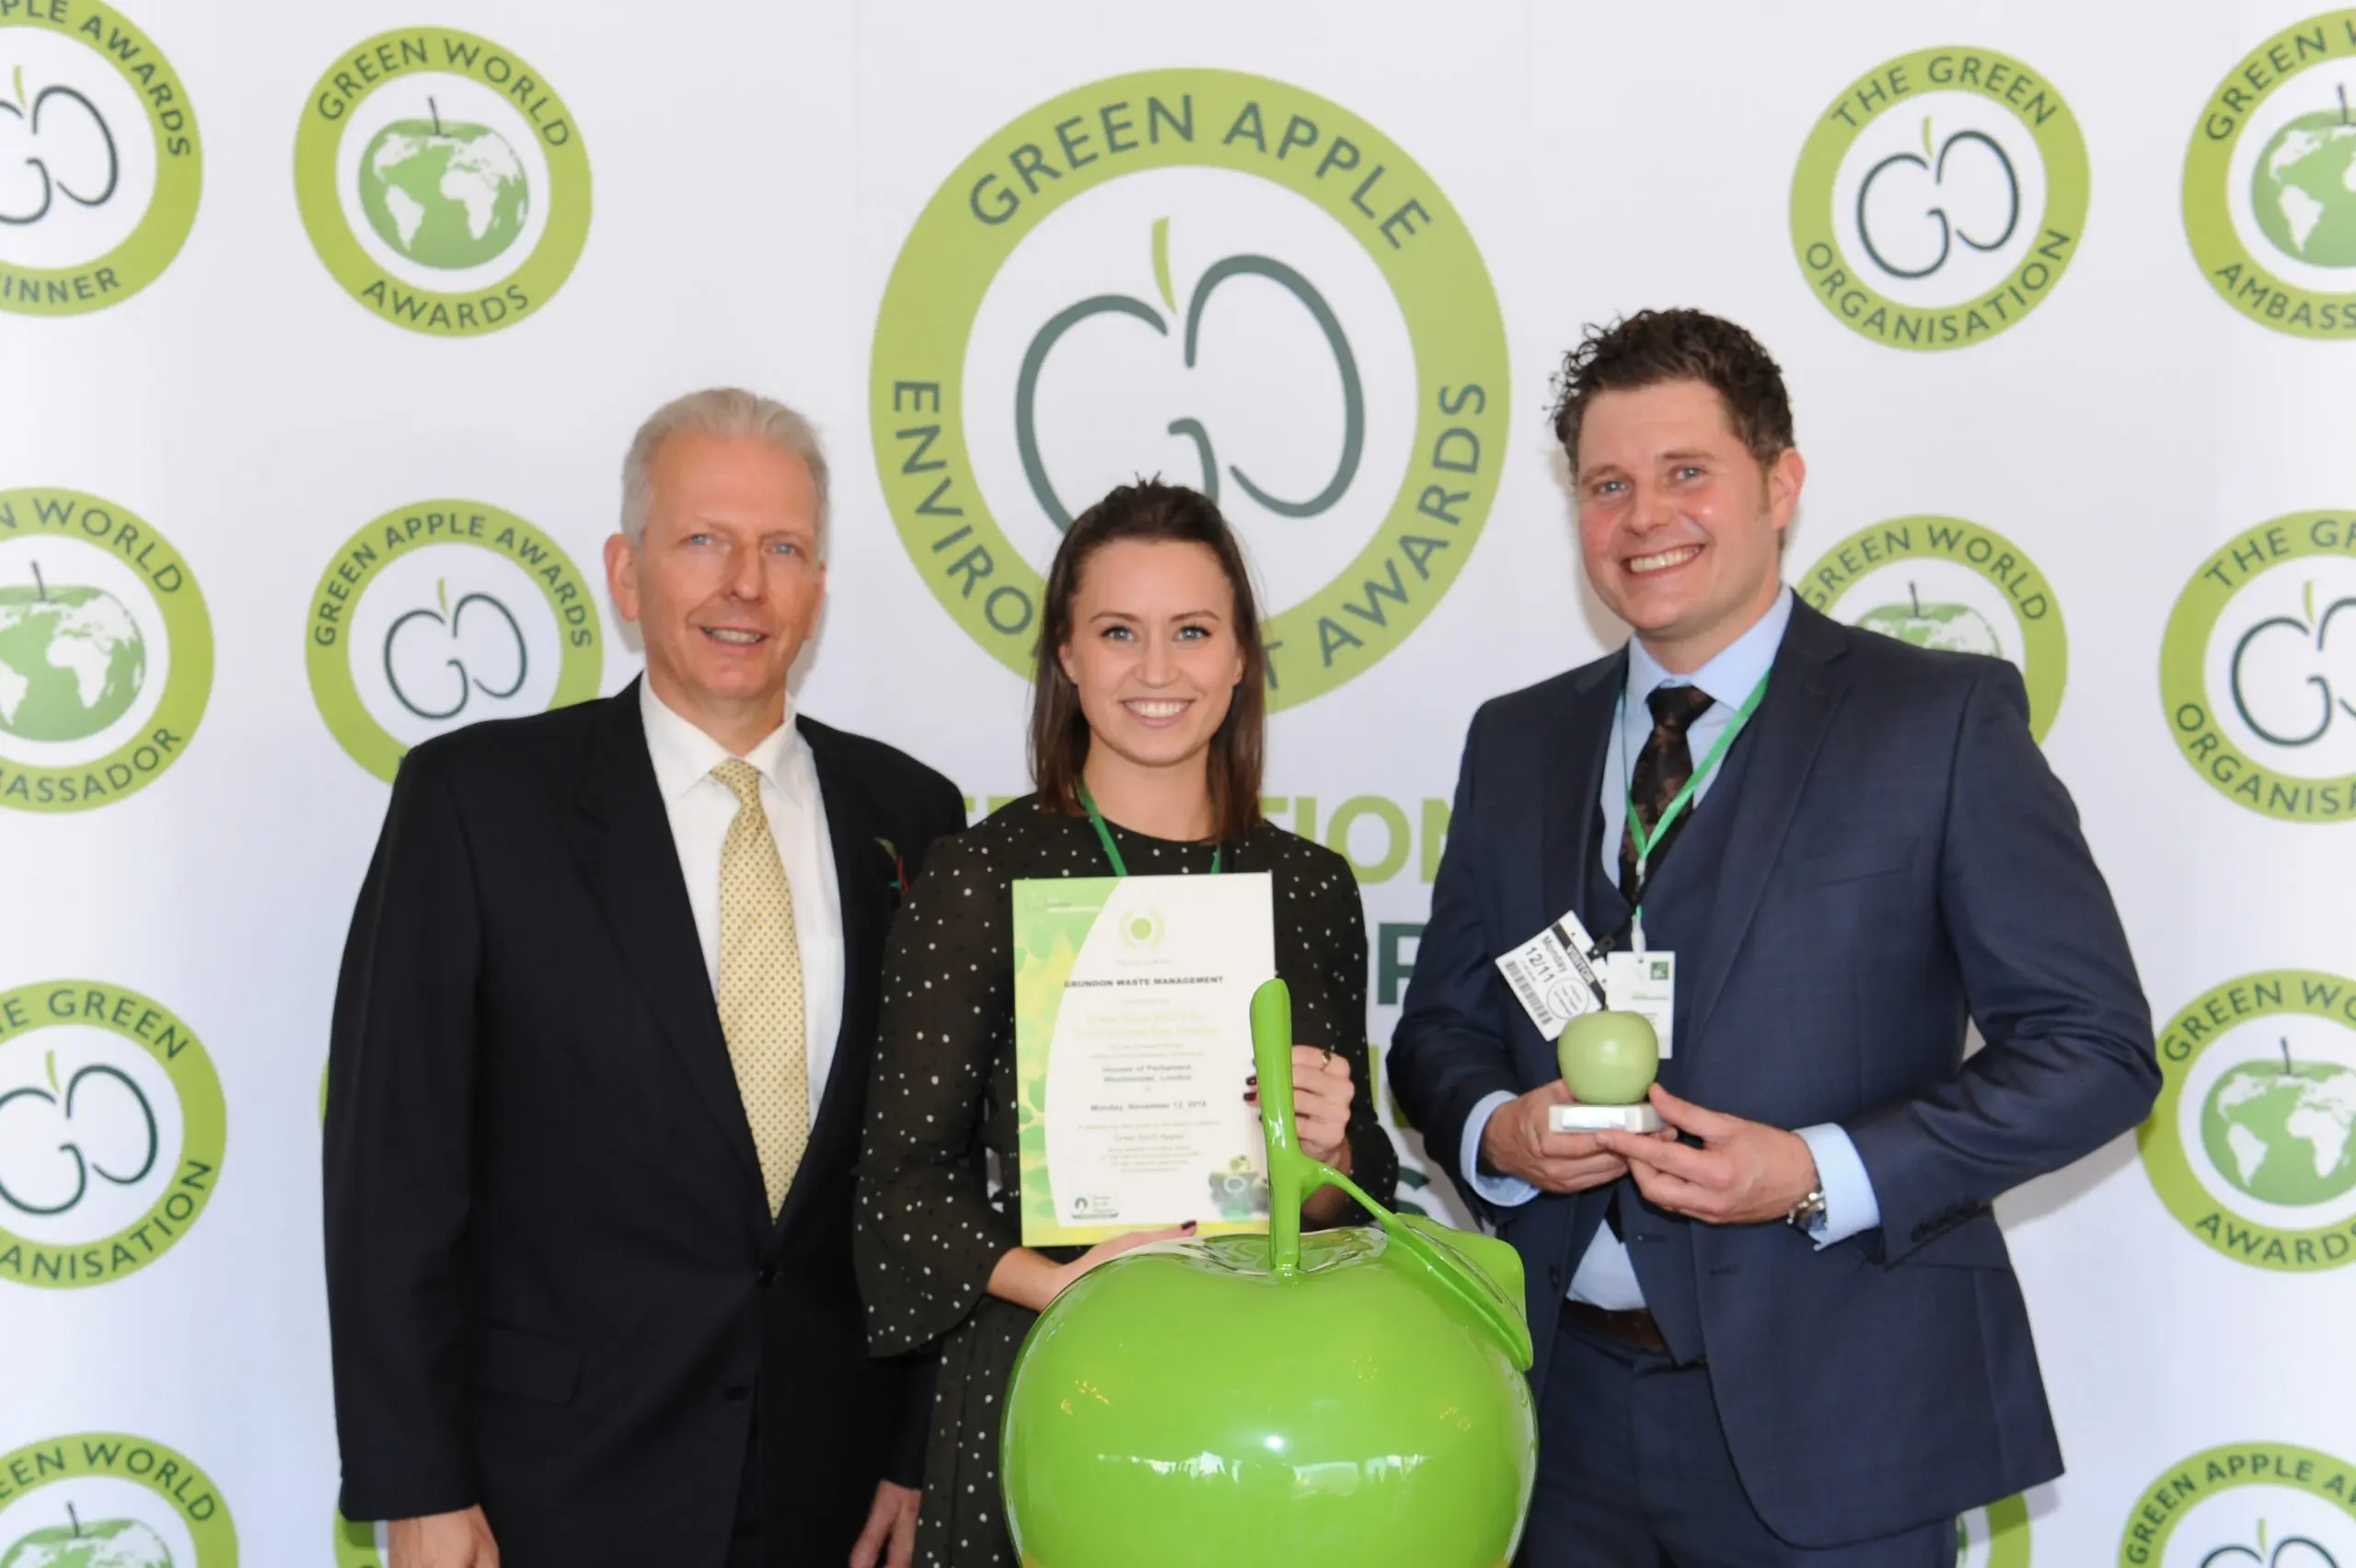 Silver lining: (from centre to left) Grundon's Alex Grant, Customer Relationship Manager - JLL; and Robert Gramson, Centre Manager at Windsor Yards Shopping Centre celebrate winning a silver Green Apple Award in the Retail and Wholesale category.